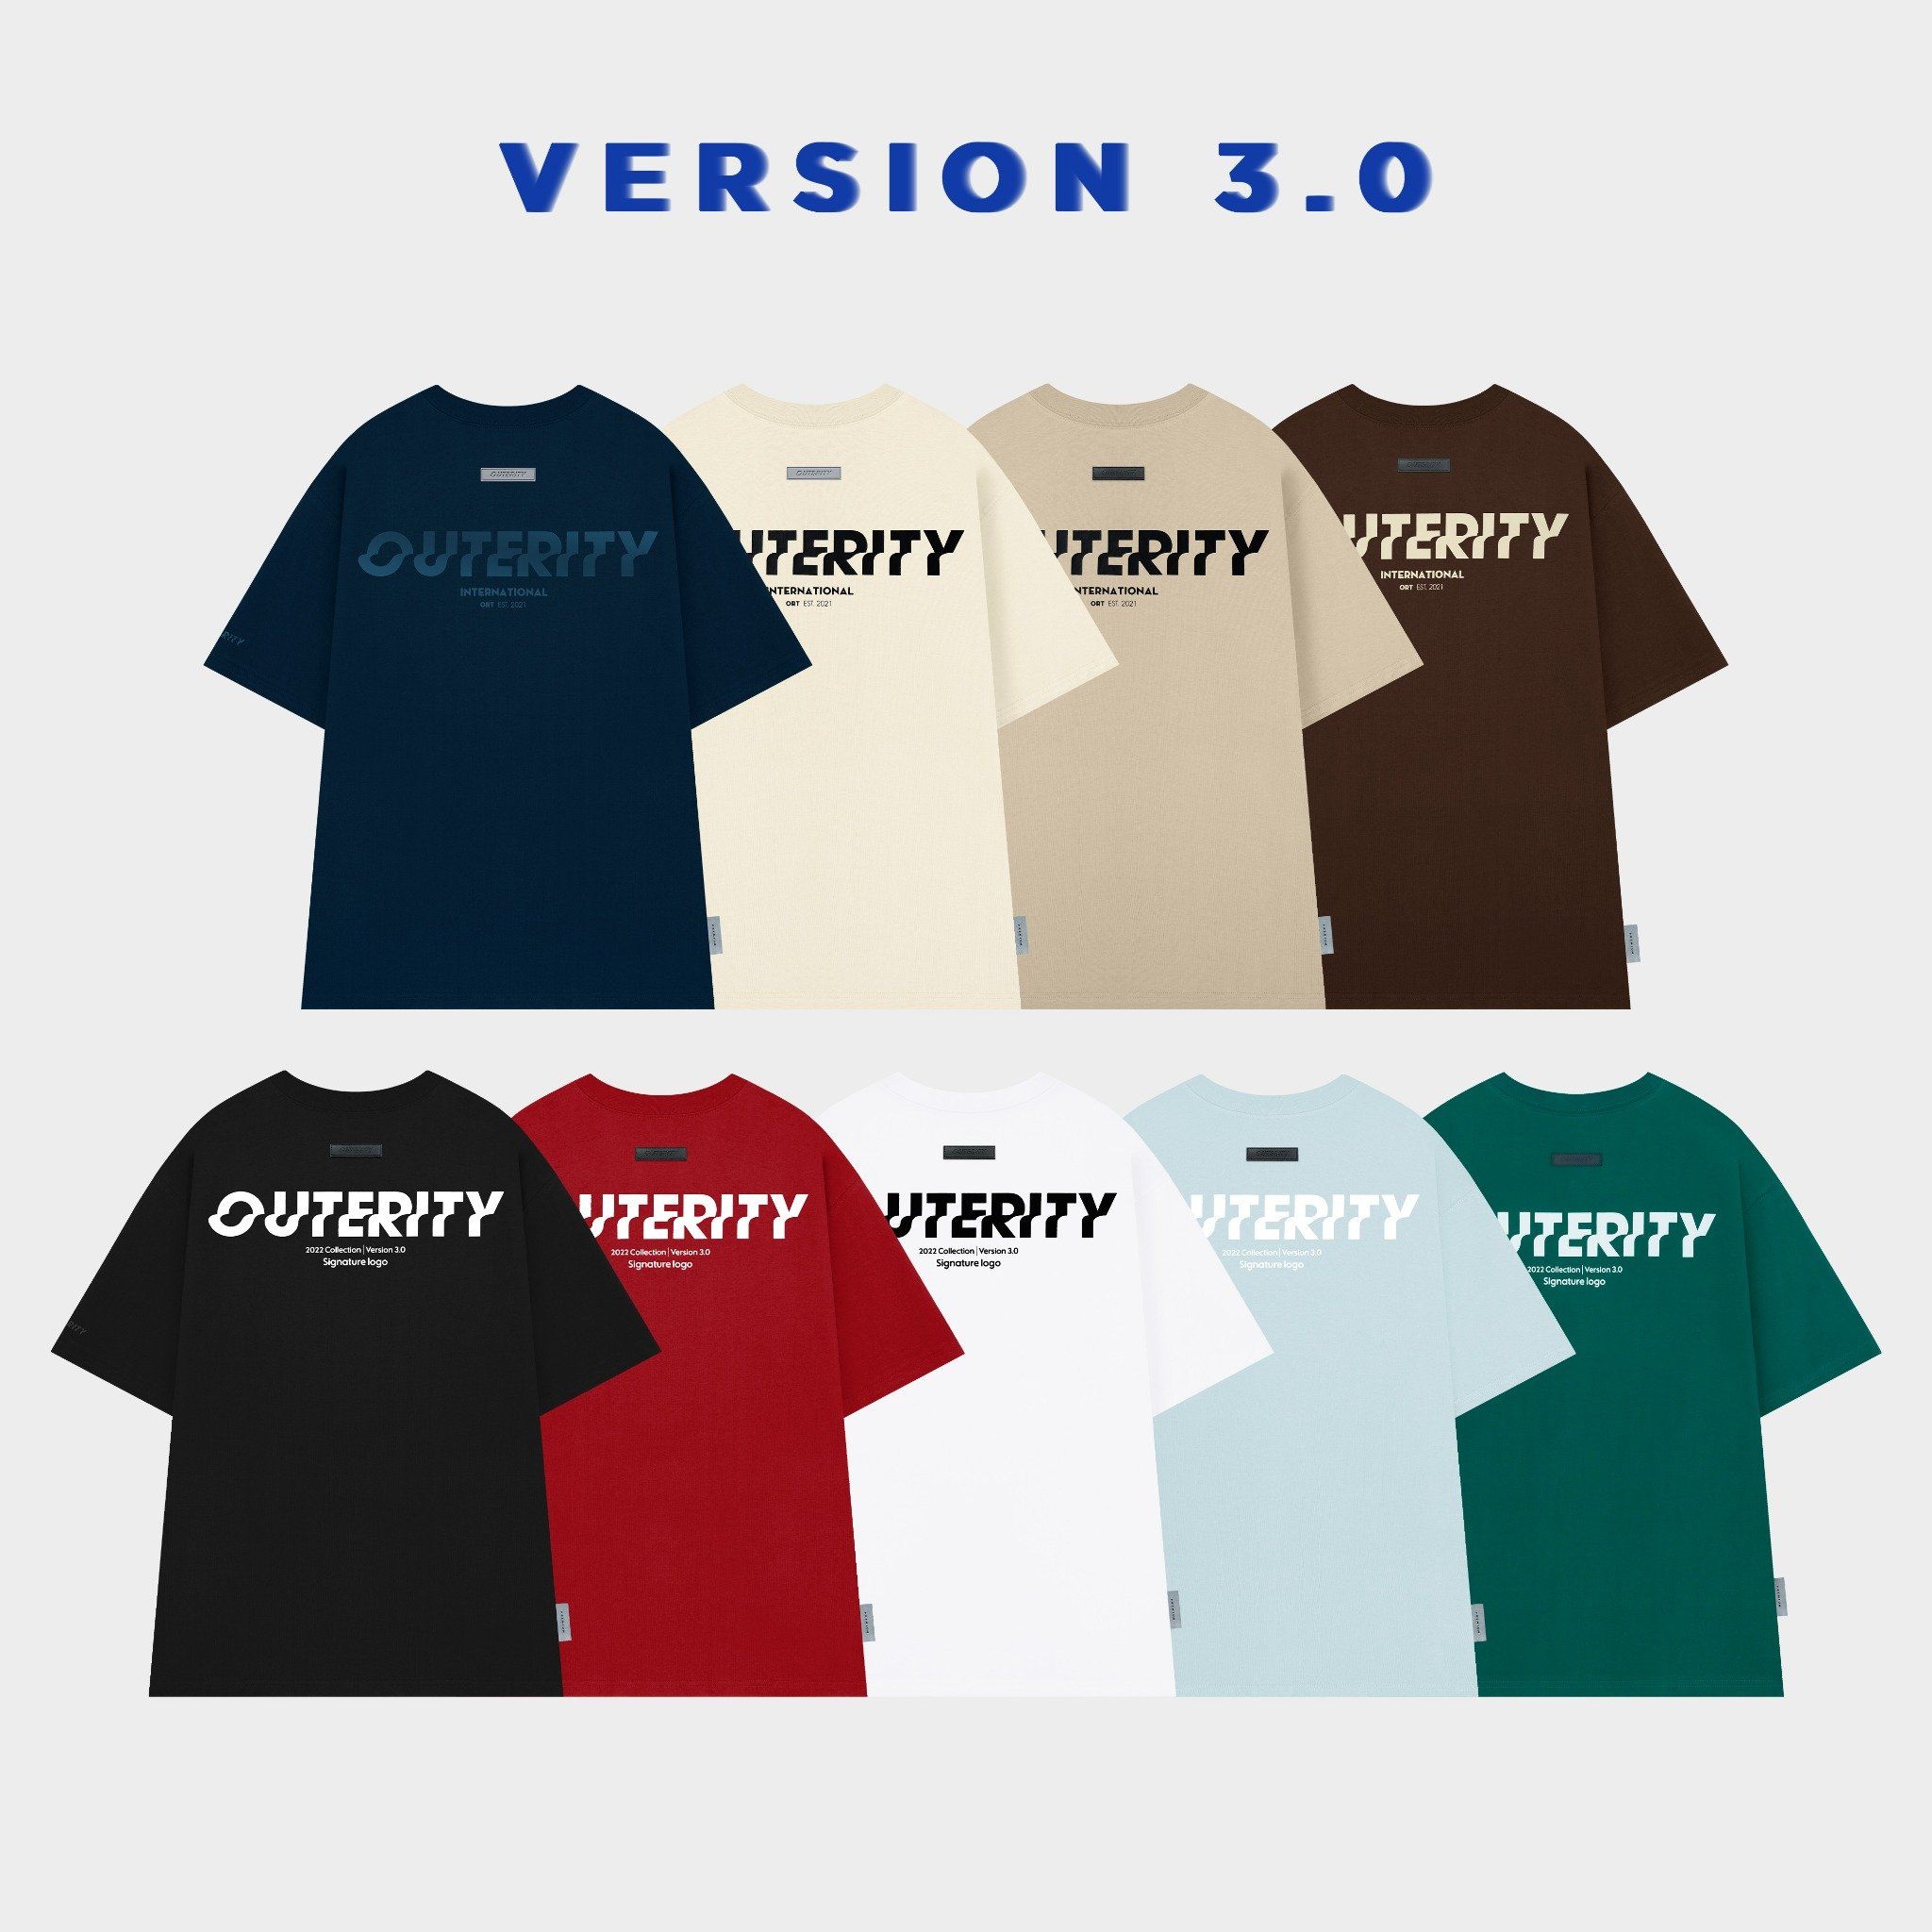  SIGNATURE TEE COLLECTION / Ver 3.0 